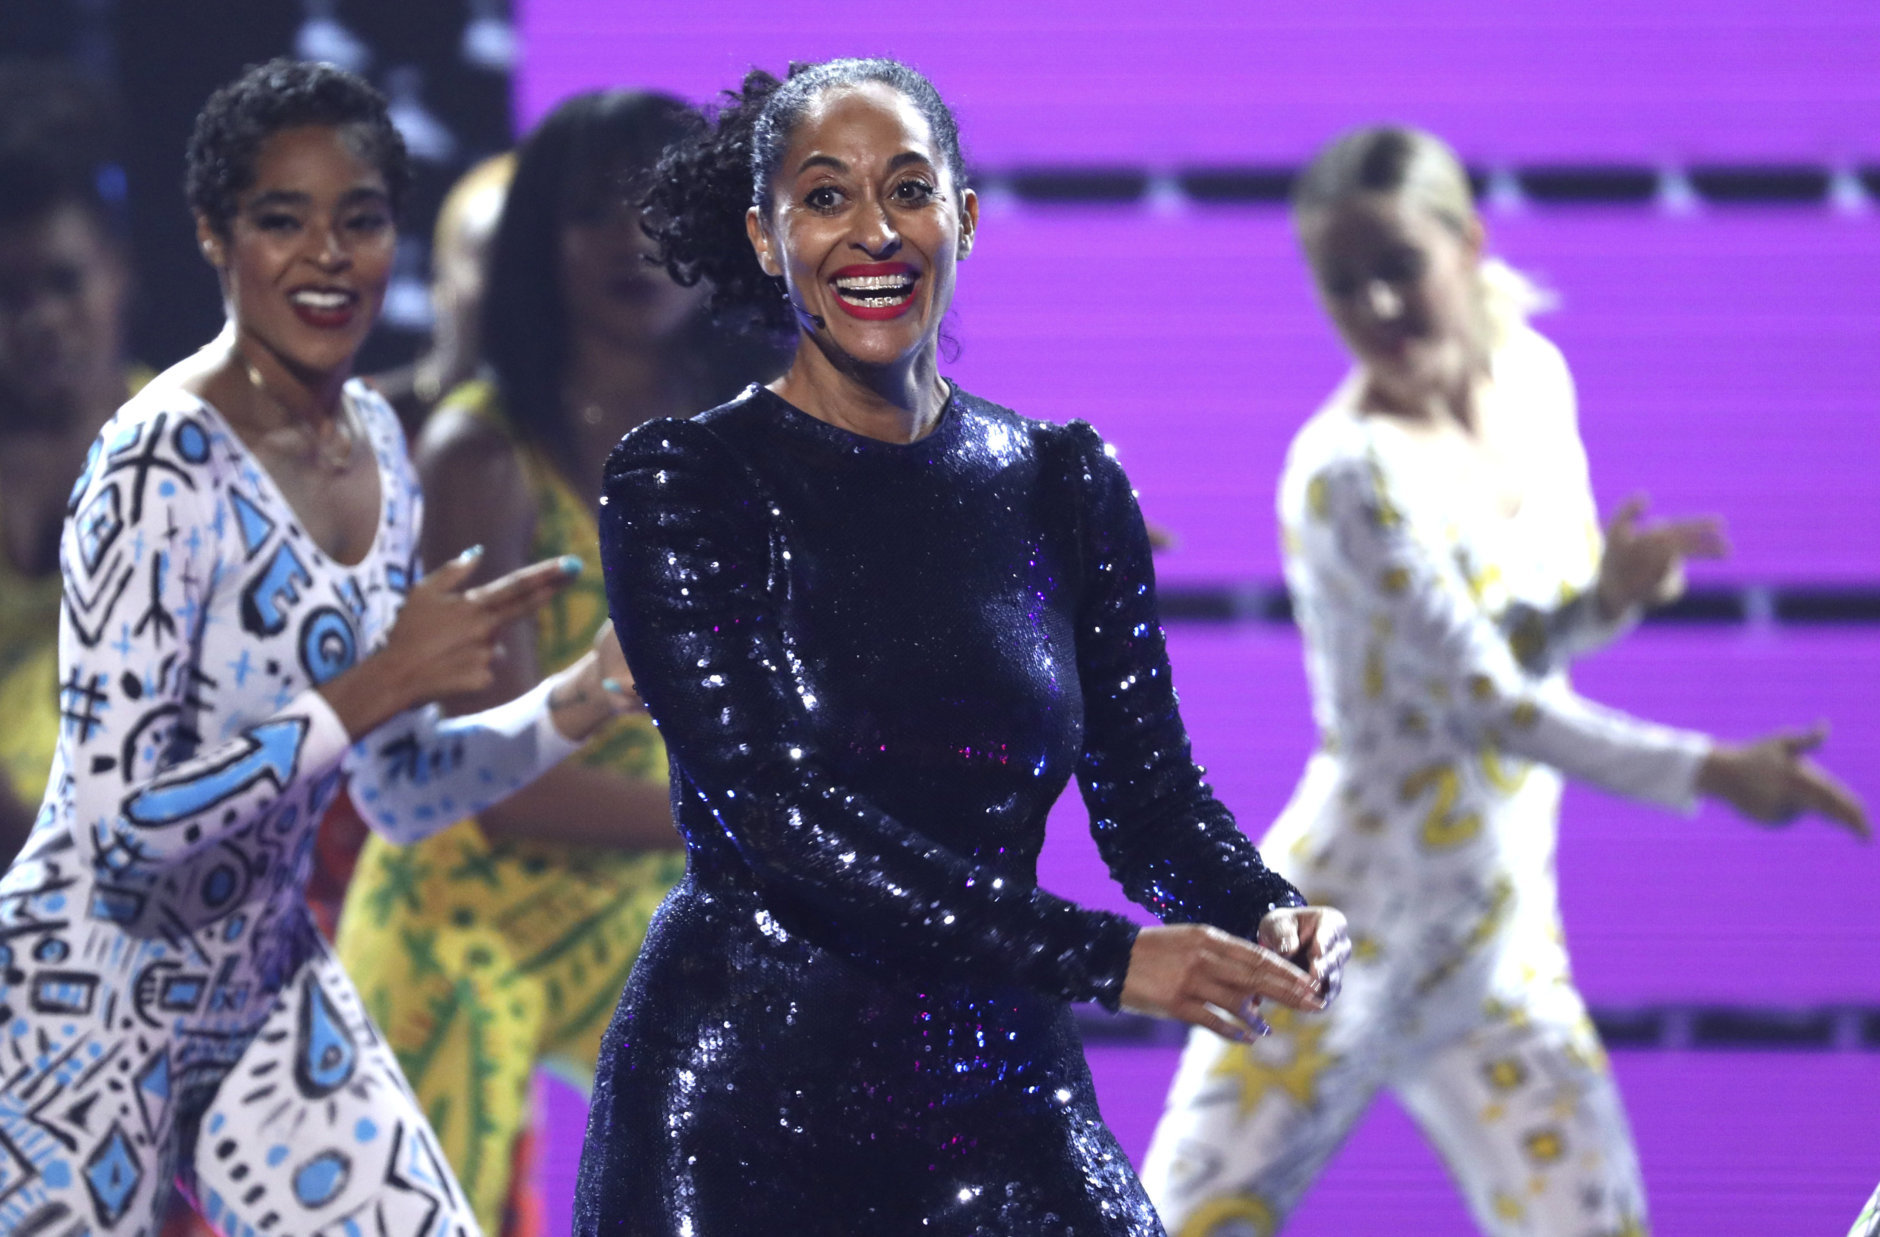 Host Tracee Ellis Ross performs at the American Music Awards on Tuesday, Oct. 9, 2018, at the Microsoft Theater in Los Angeles. (Photo by Matt Sayles/Invision/AP)